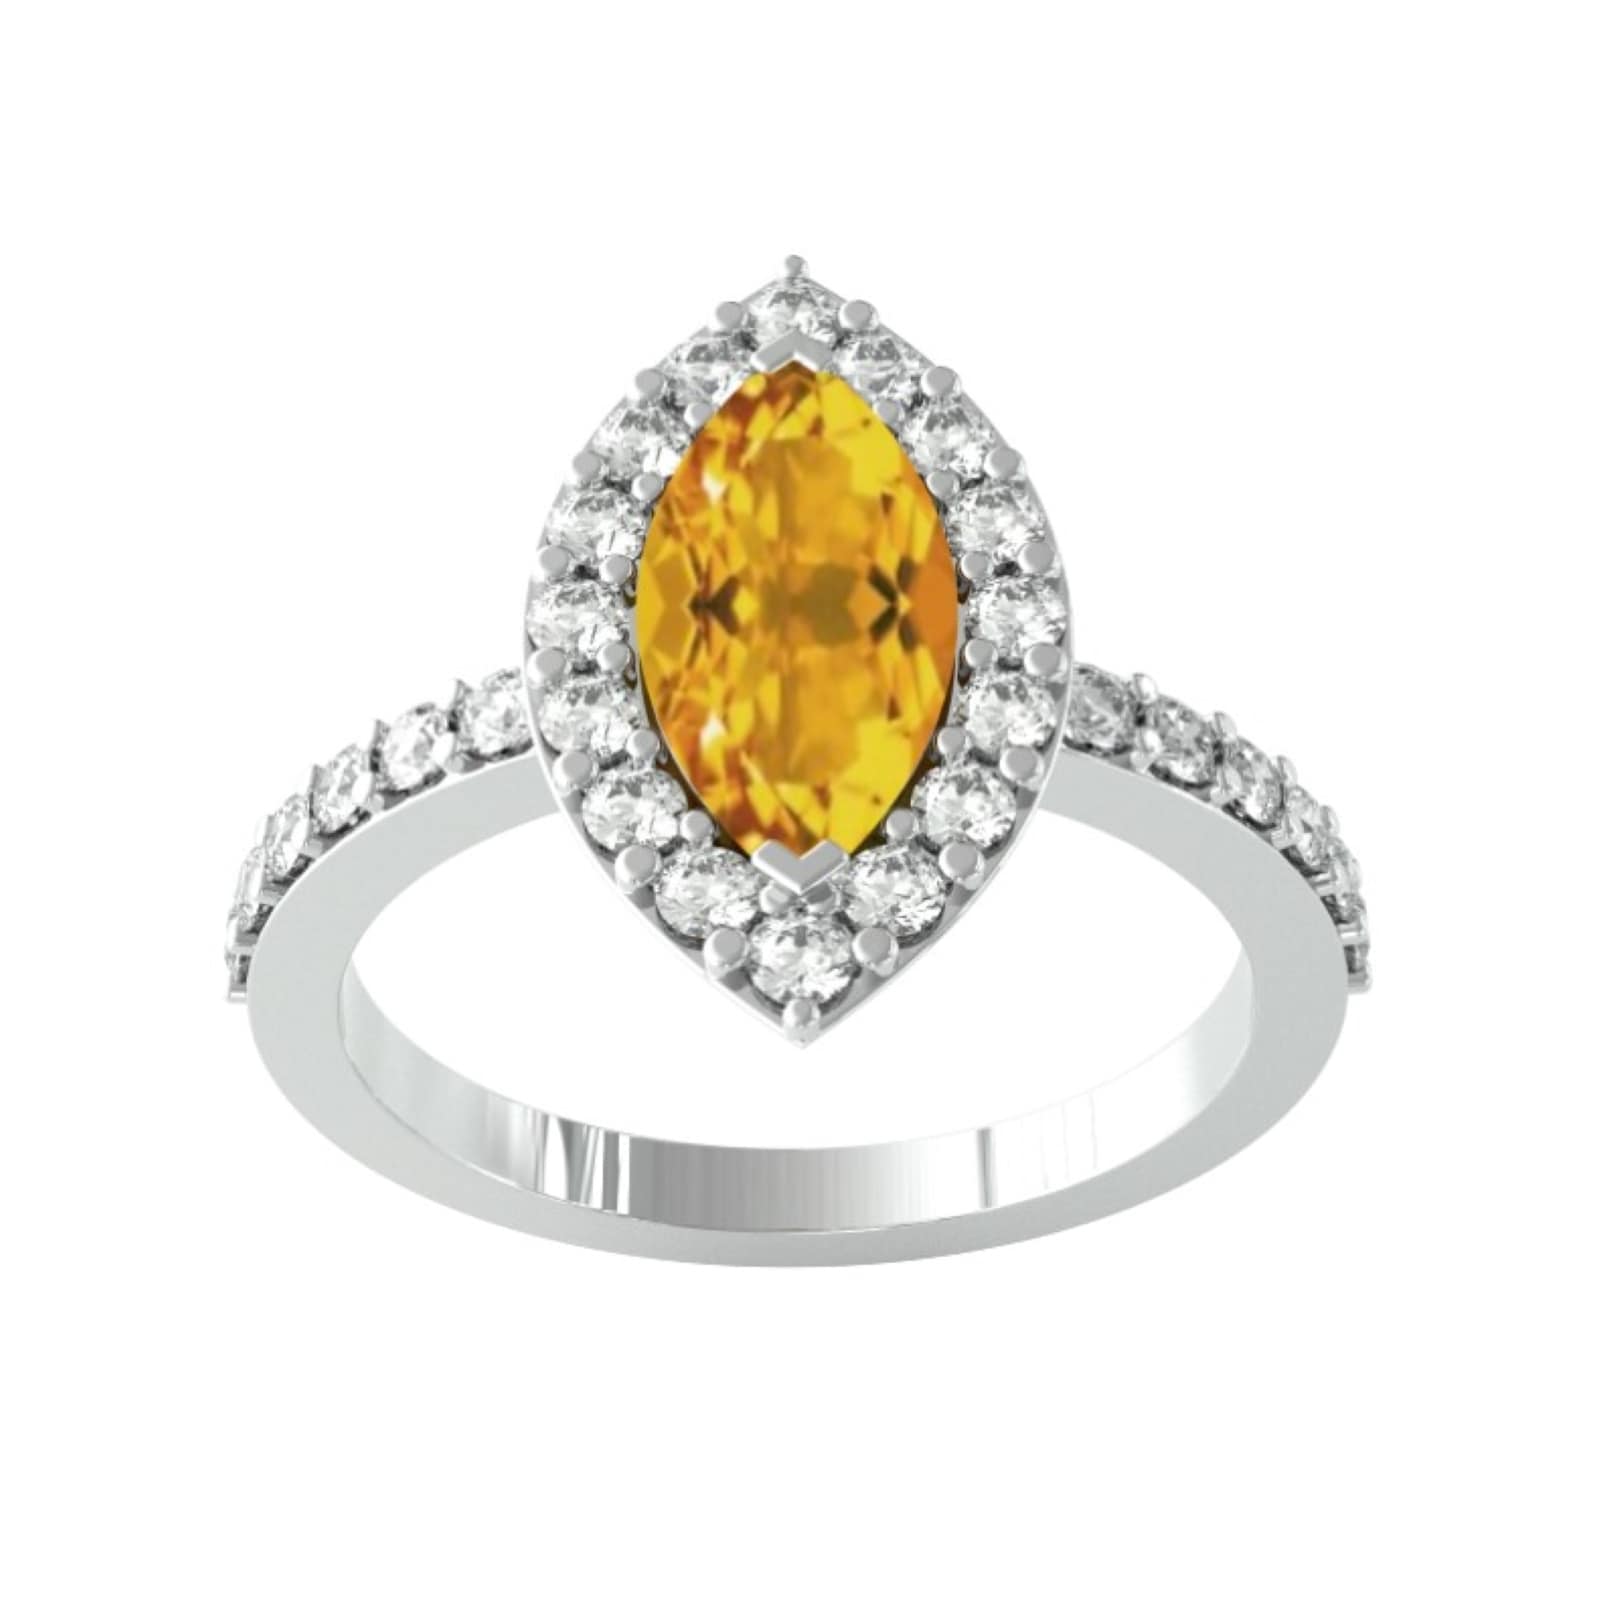 9ct White Gold Marquise Cut Citrine & Diamond Ring - Ring Size Y.5